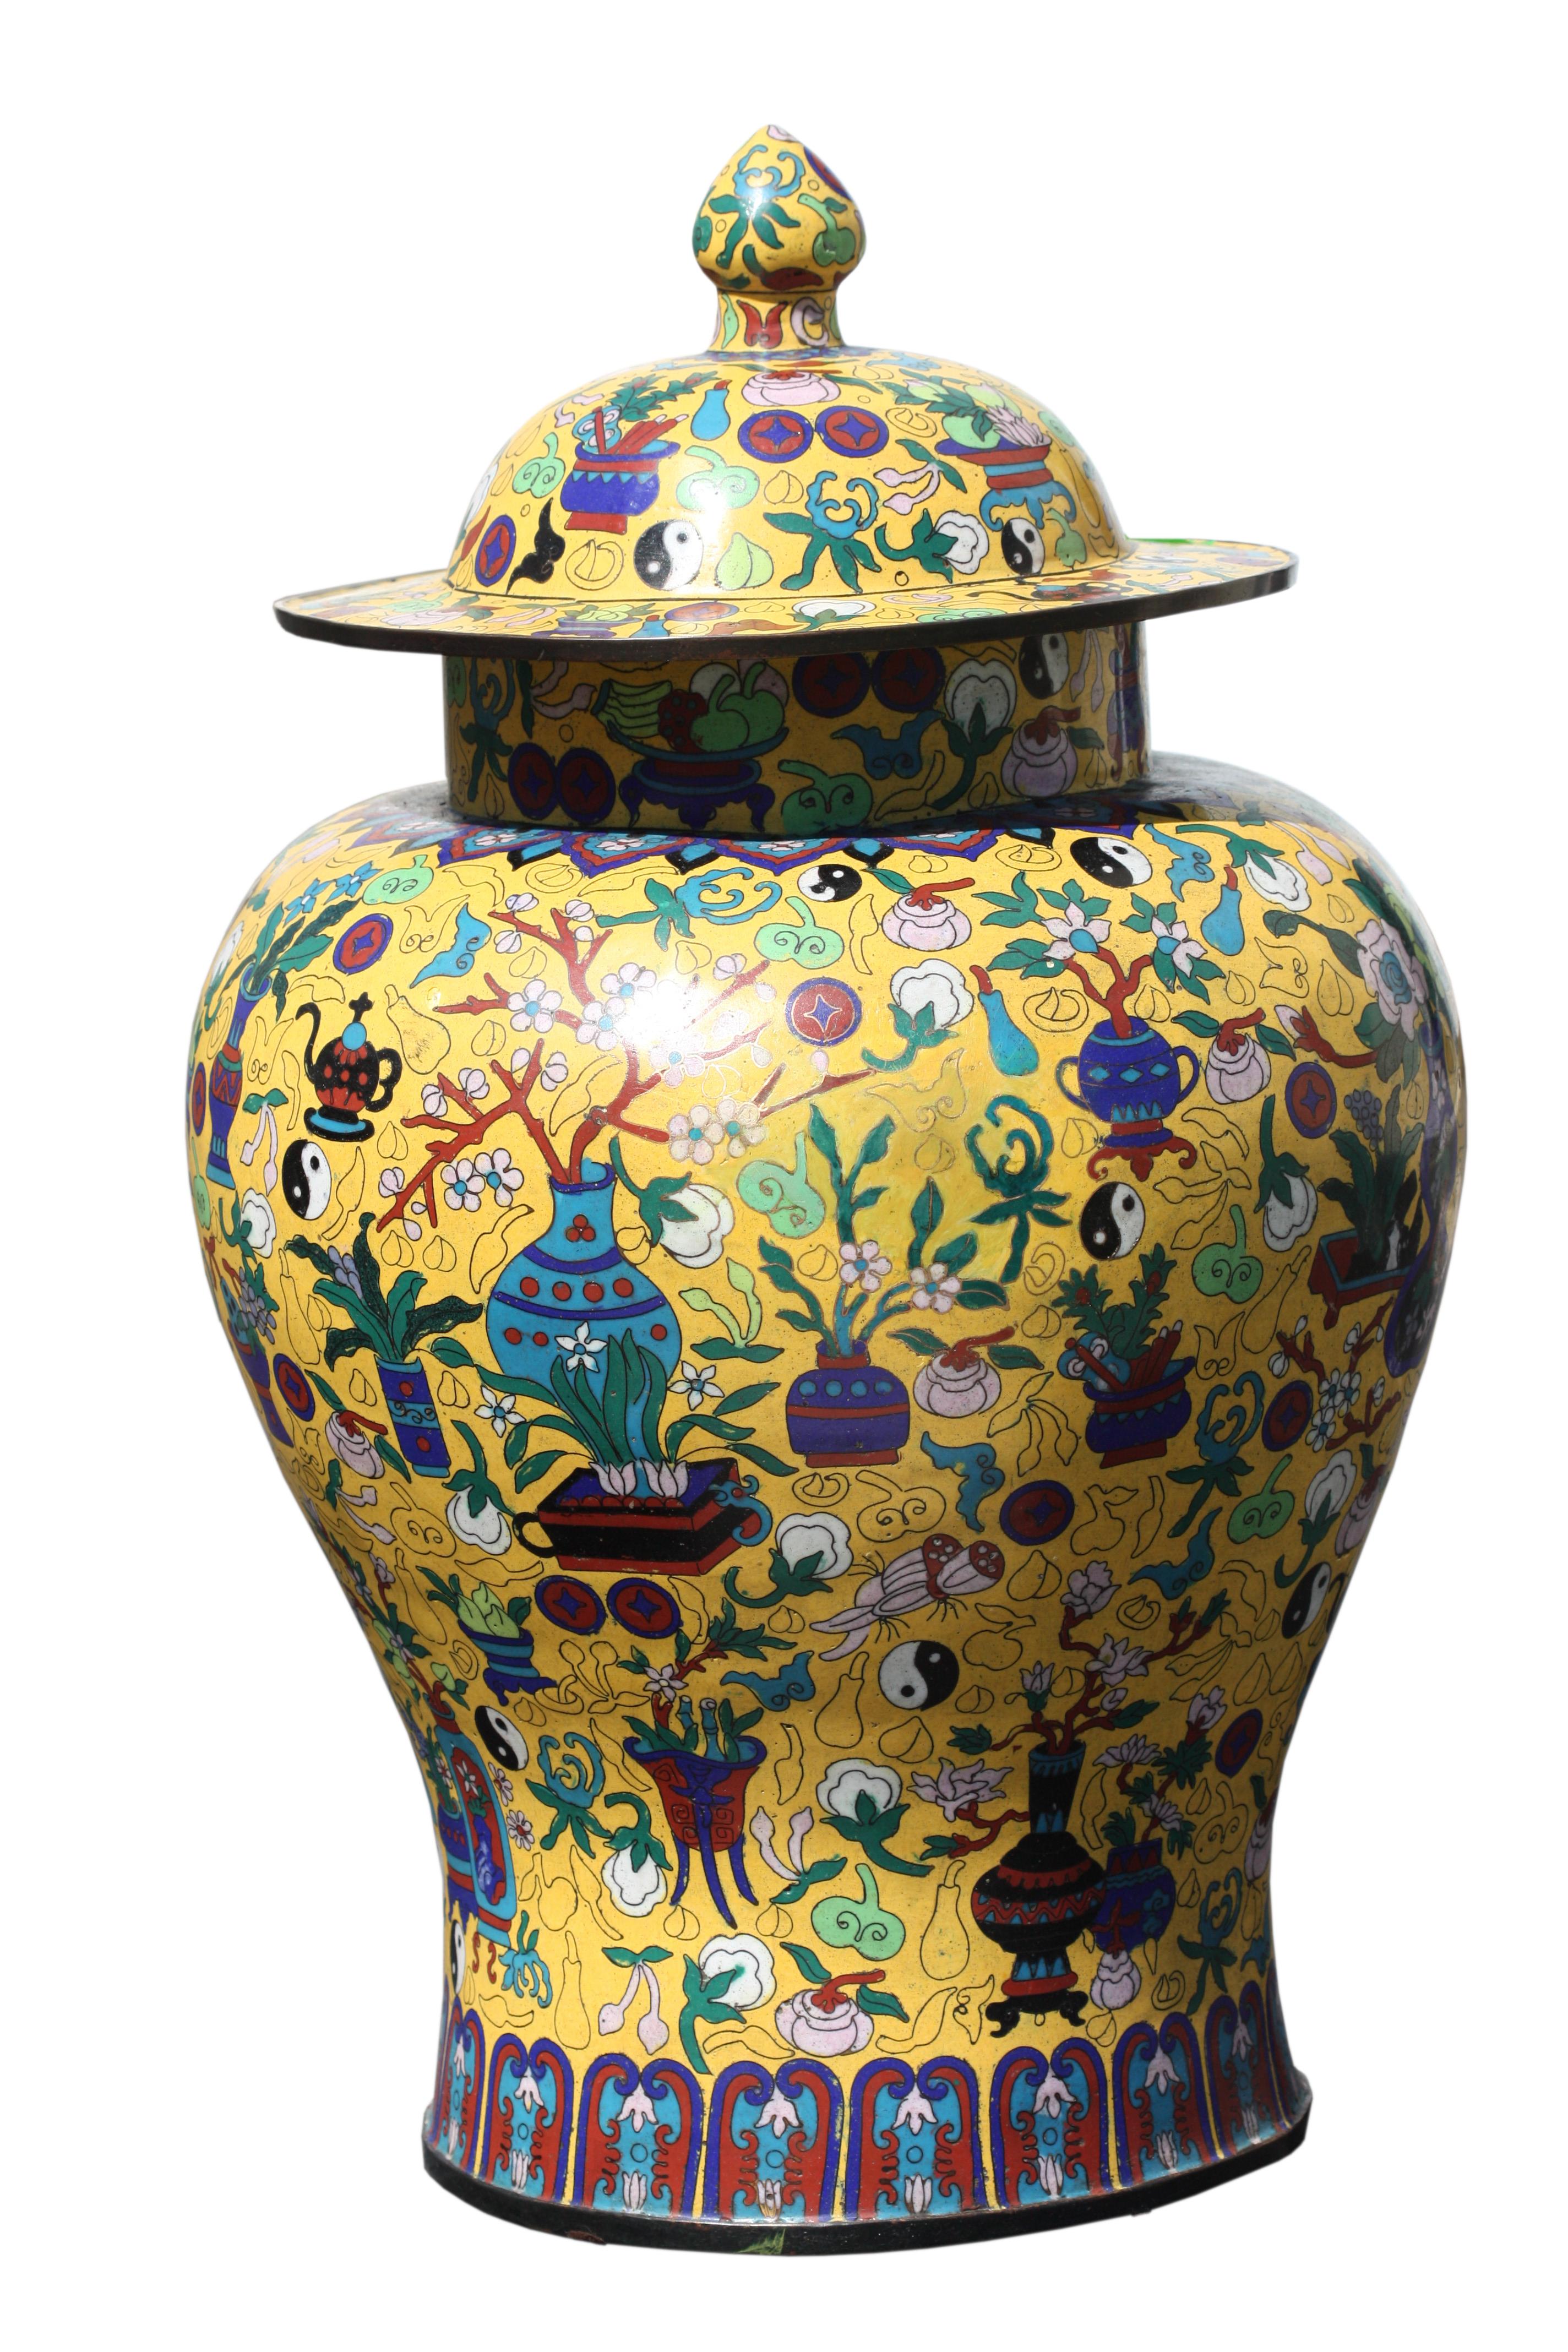 A Pair of Large Cloisonne Enamel Vases and Covers 
Chinese, late 20th century
Brightly enameled flowers in pink, orange and blue, with soaring birds and butterflies on a soft yellow ground of small cloud forms. Footed bases with blue stylized ruyi